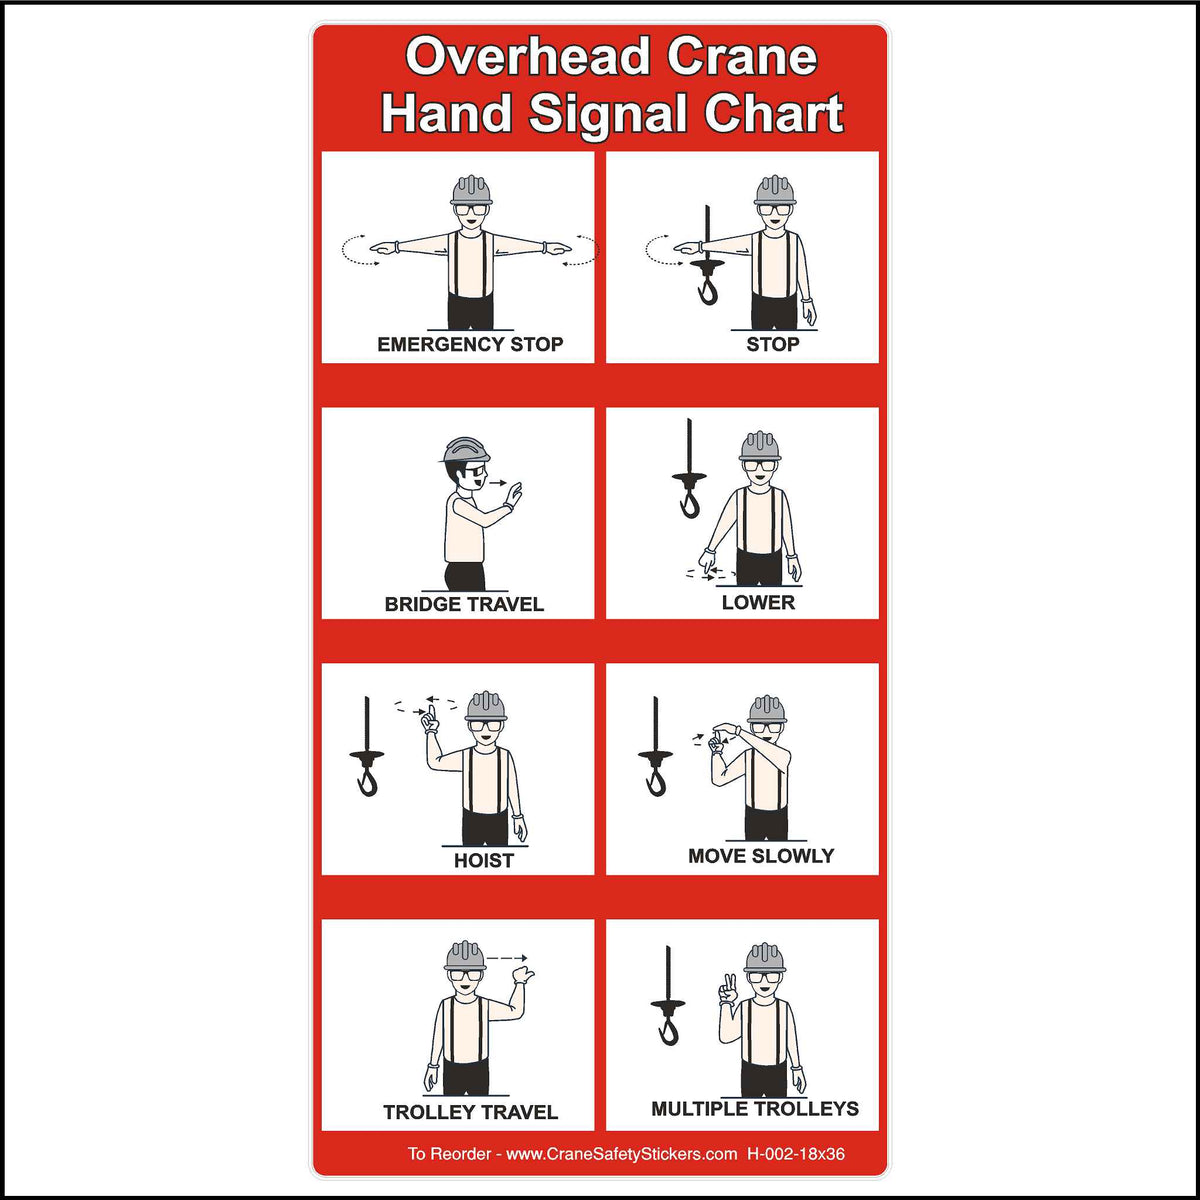 Overhead Crane Hand Signal Chart with all hand signals. 18 inches by 36 inches in size.